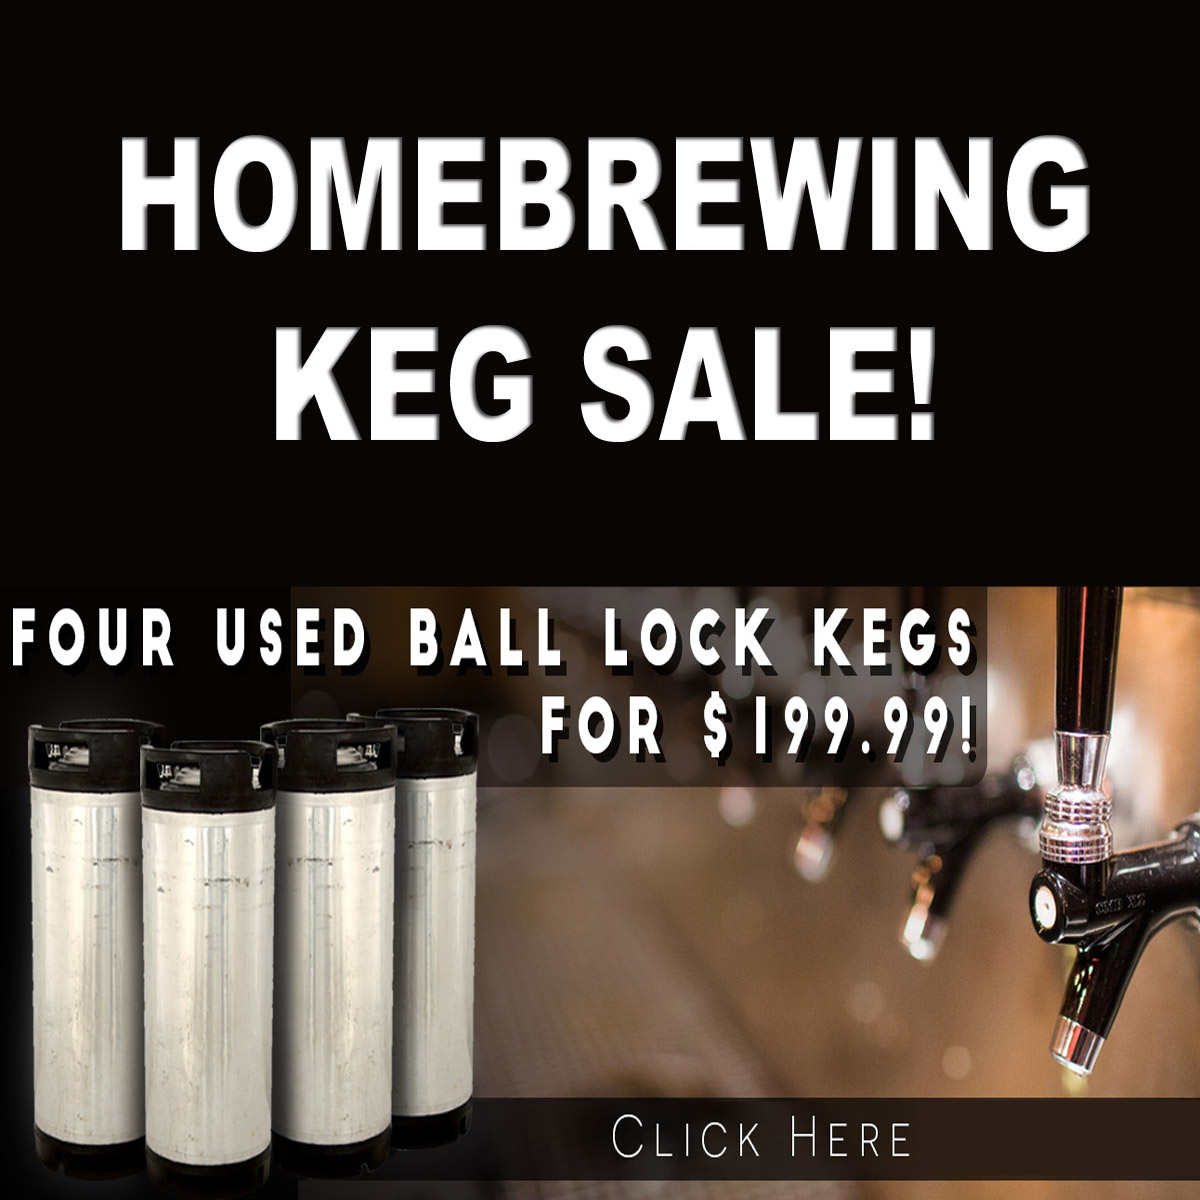  Home Brewer Promo Code for Get 4 HomeBrewing Kegs for Just $199 and Free Shipping! Coupon Code